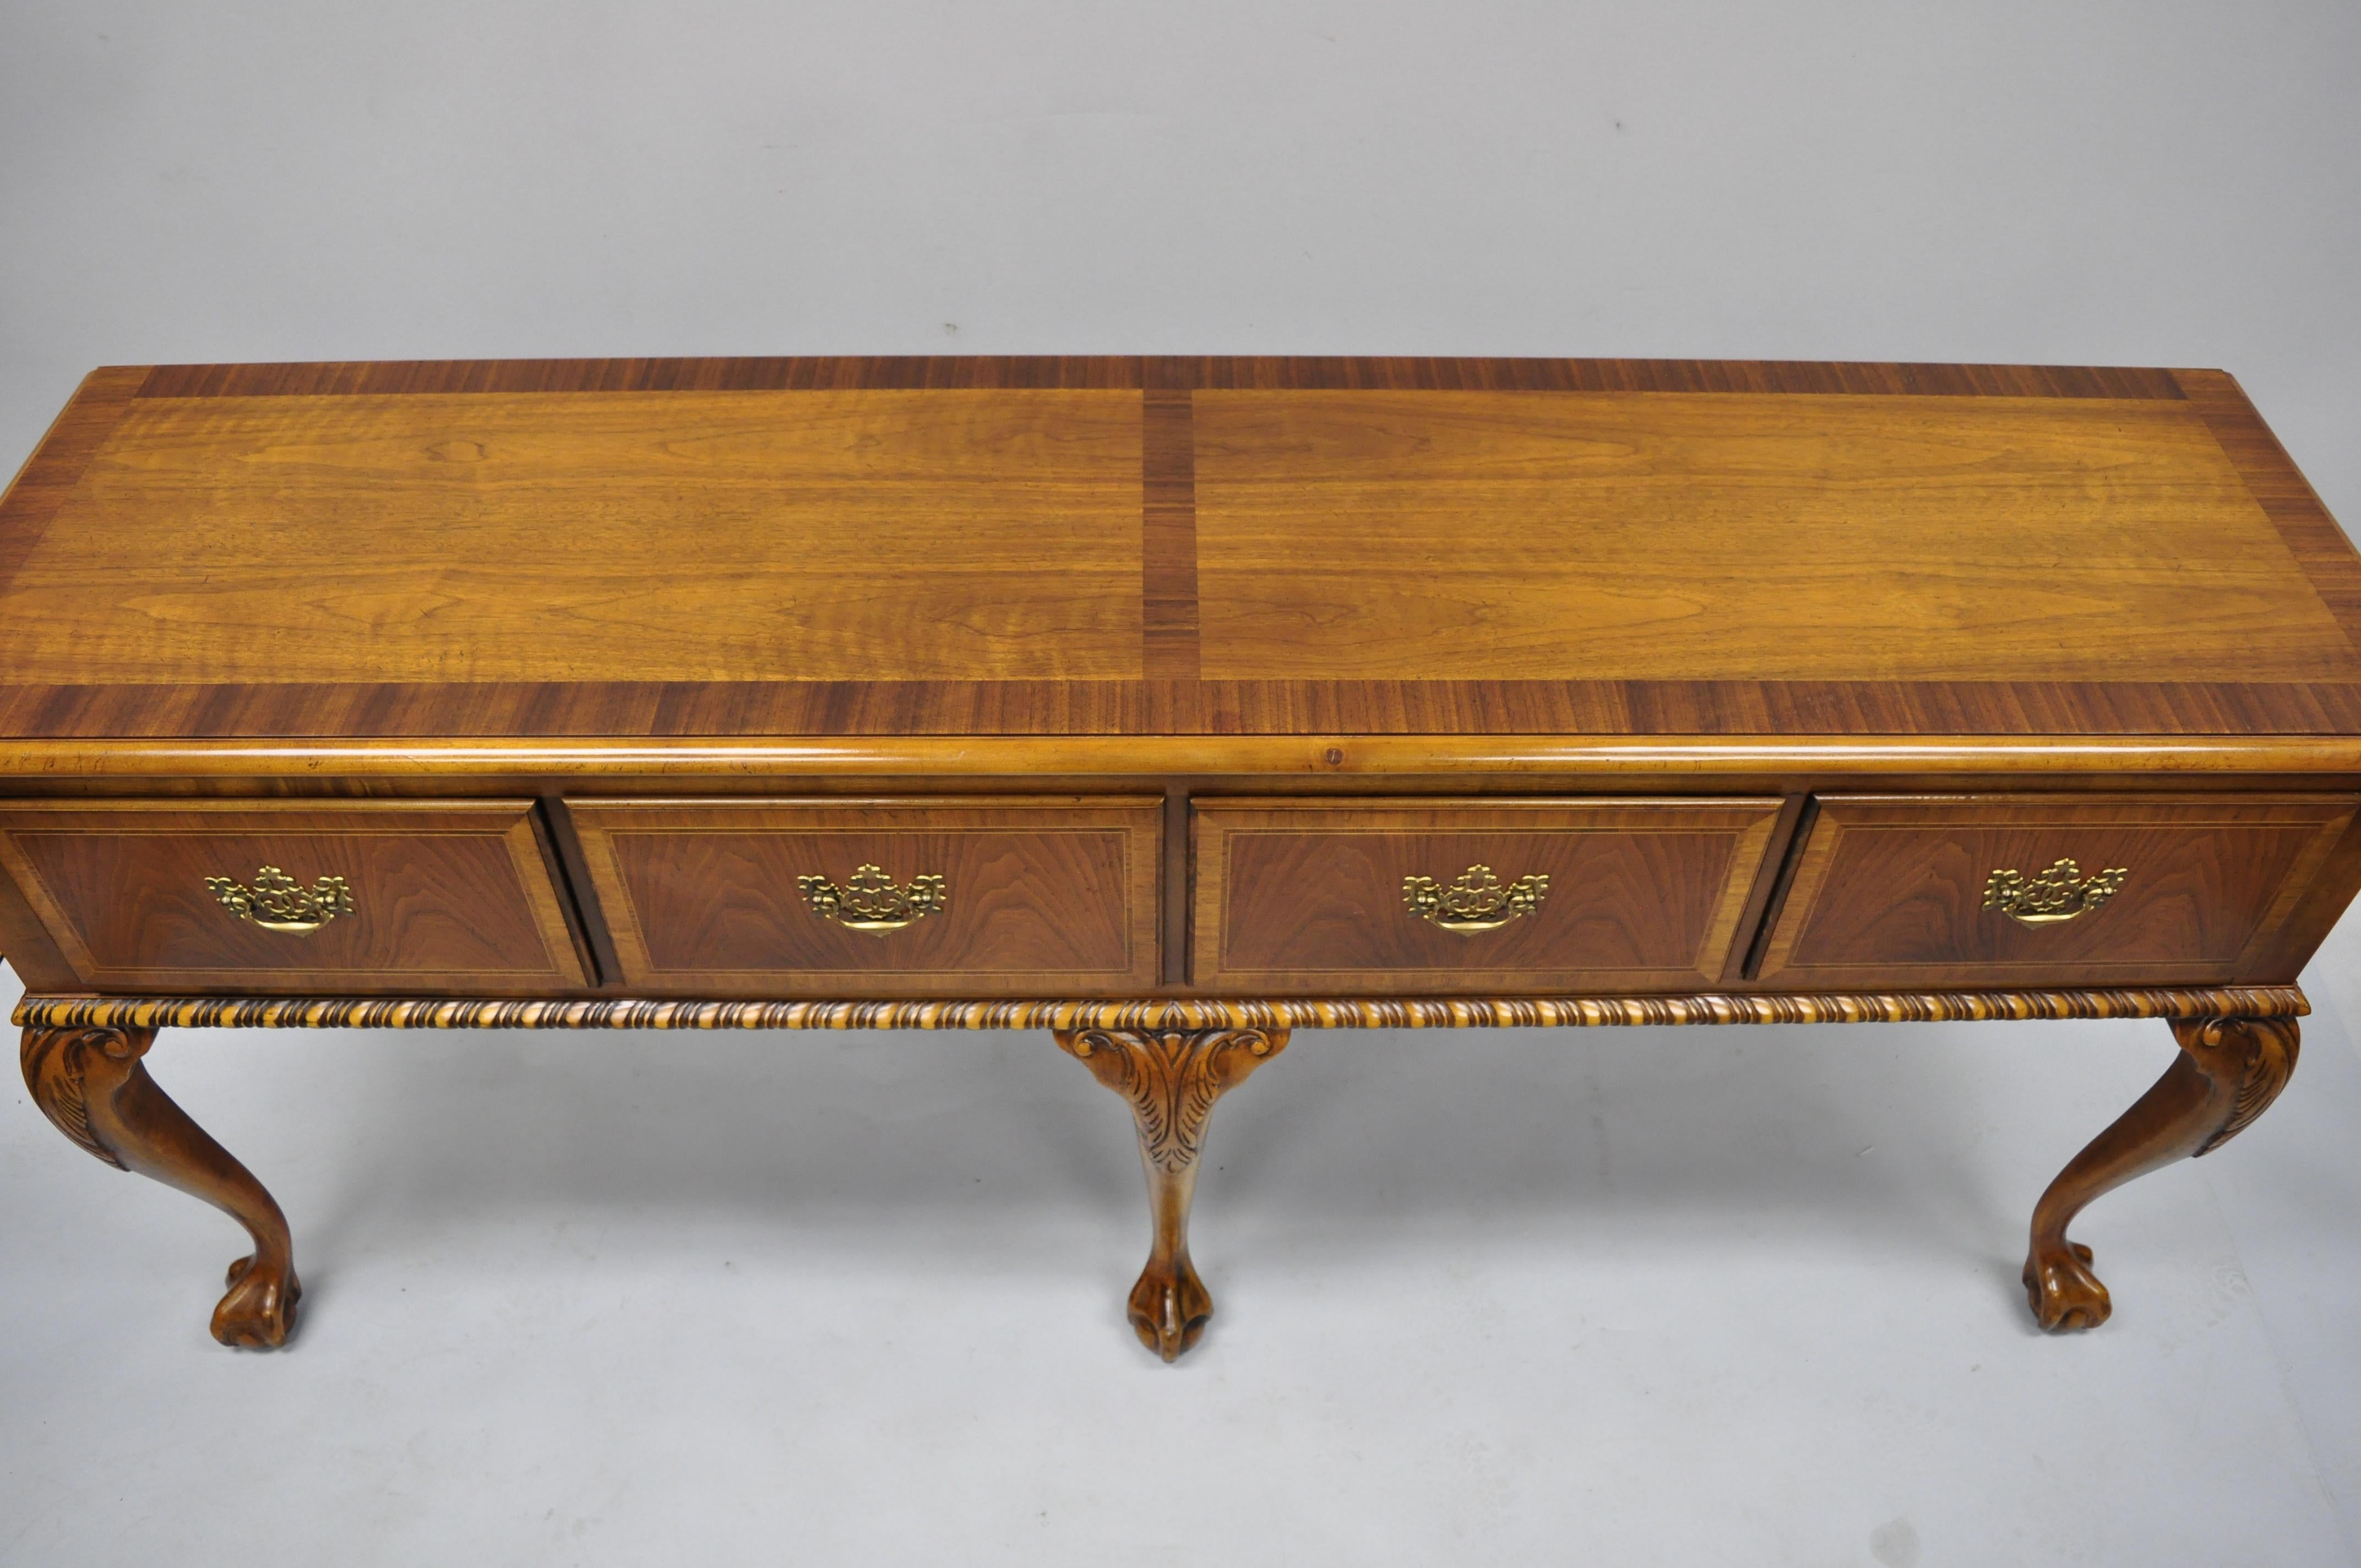 20th Century Baker 4-Drawer Ball and Claw Chippendale Mahogany Banded Sideboard Buffet Server